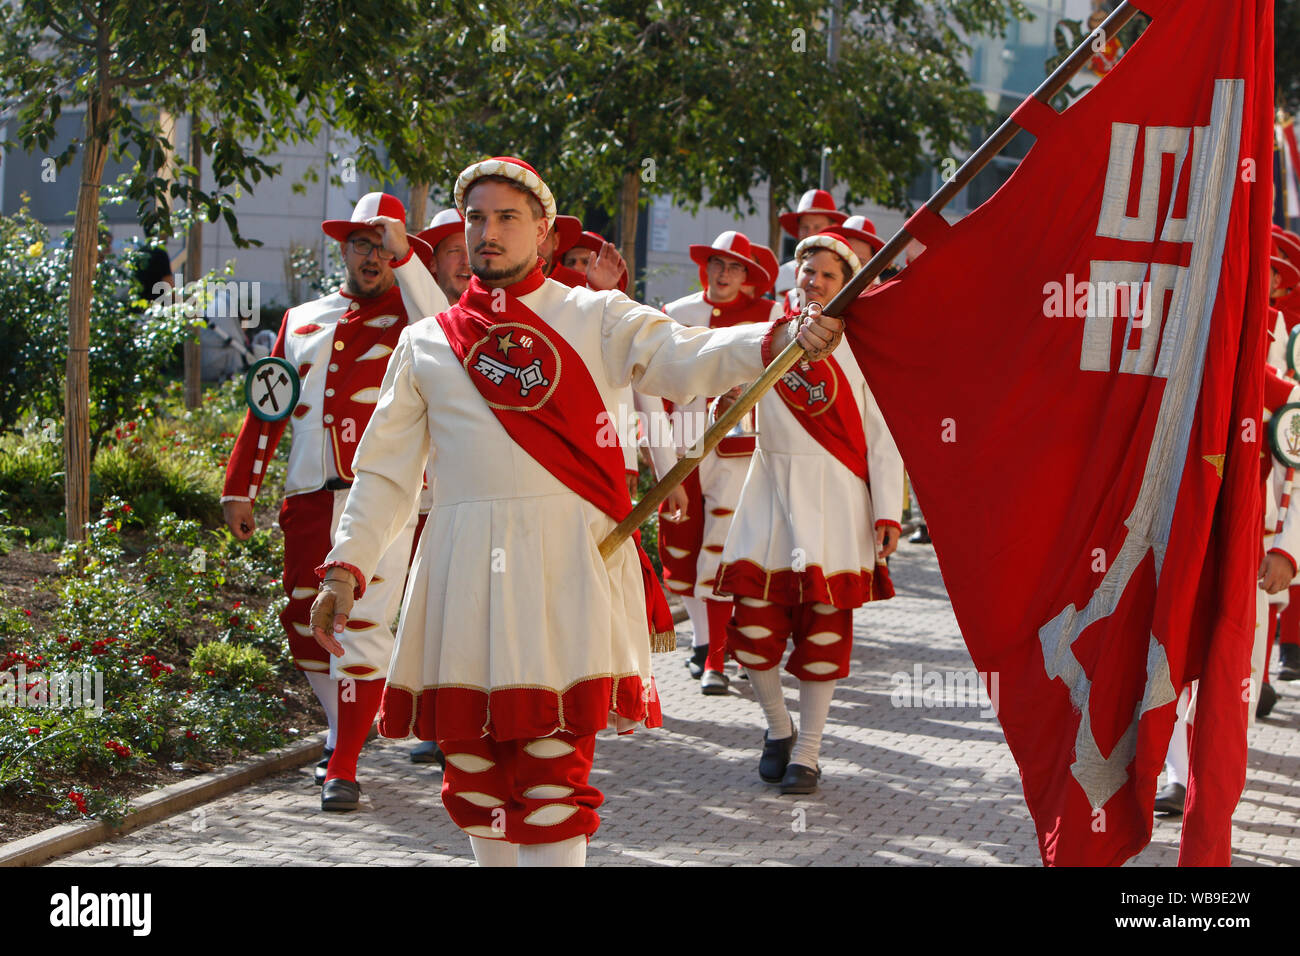 Worms, Germany. 24th August 2019. Journeymen march through the city centre of Worms. They are led by a colour guard. The largest wine and funfair along the river Rhine, the Backfischfest started in Worms with the traditional handing over of power from the Lord Mayor to the mayor of the fishermen’s lea. The ceremony was framed by dances and music. Stock Photo